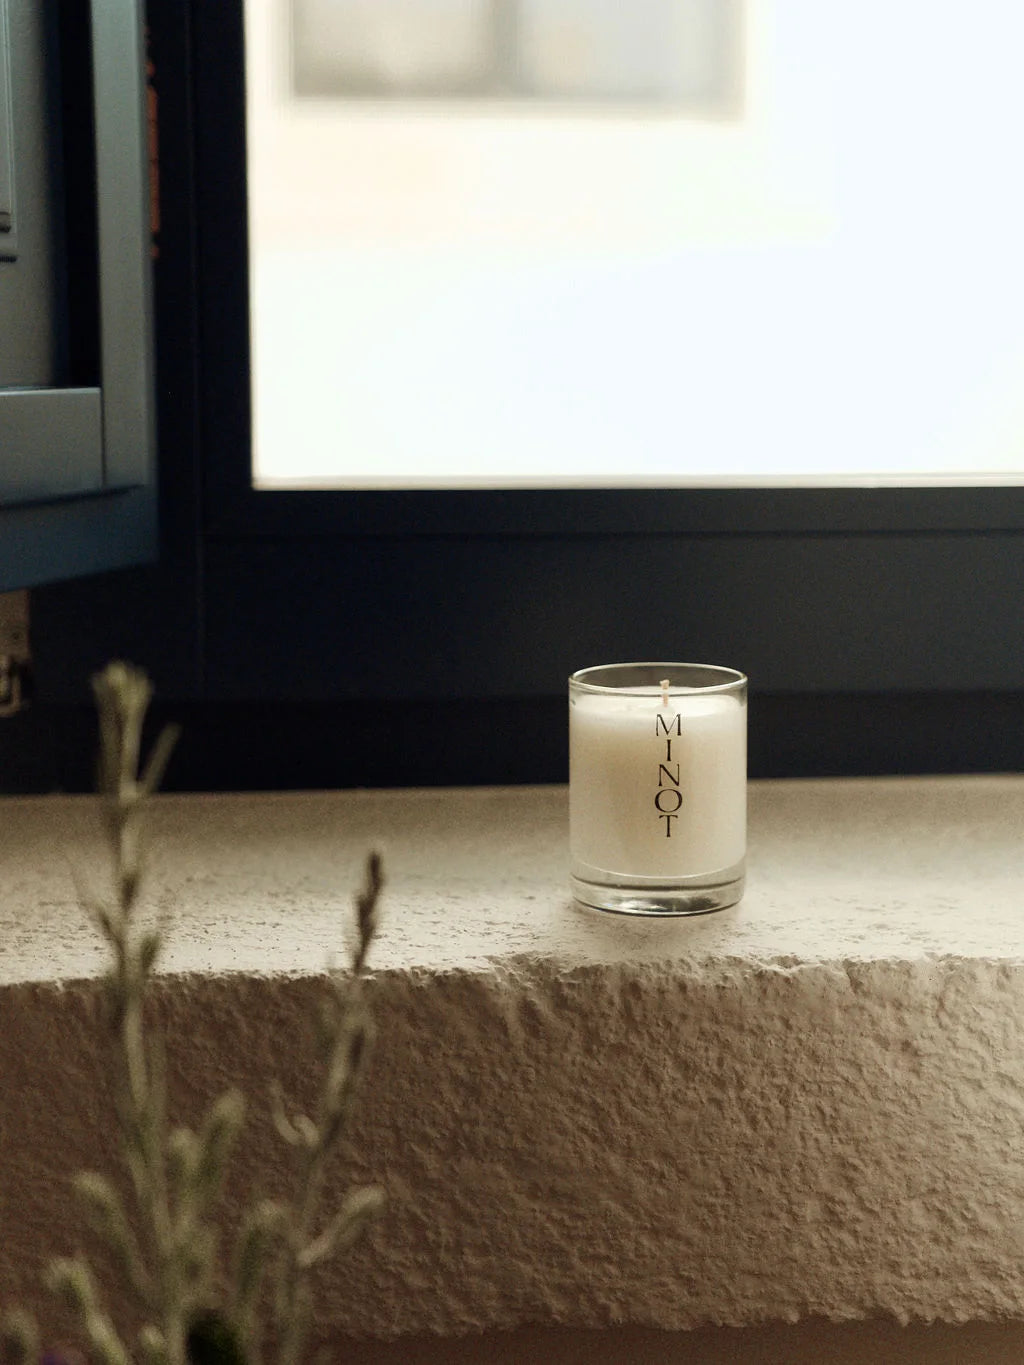 MINOT's mini soy candle in the crisp, earthy scent blend Terrene sits on a windowsill near greenery